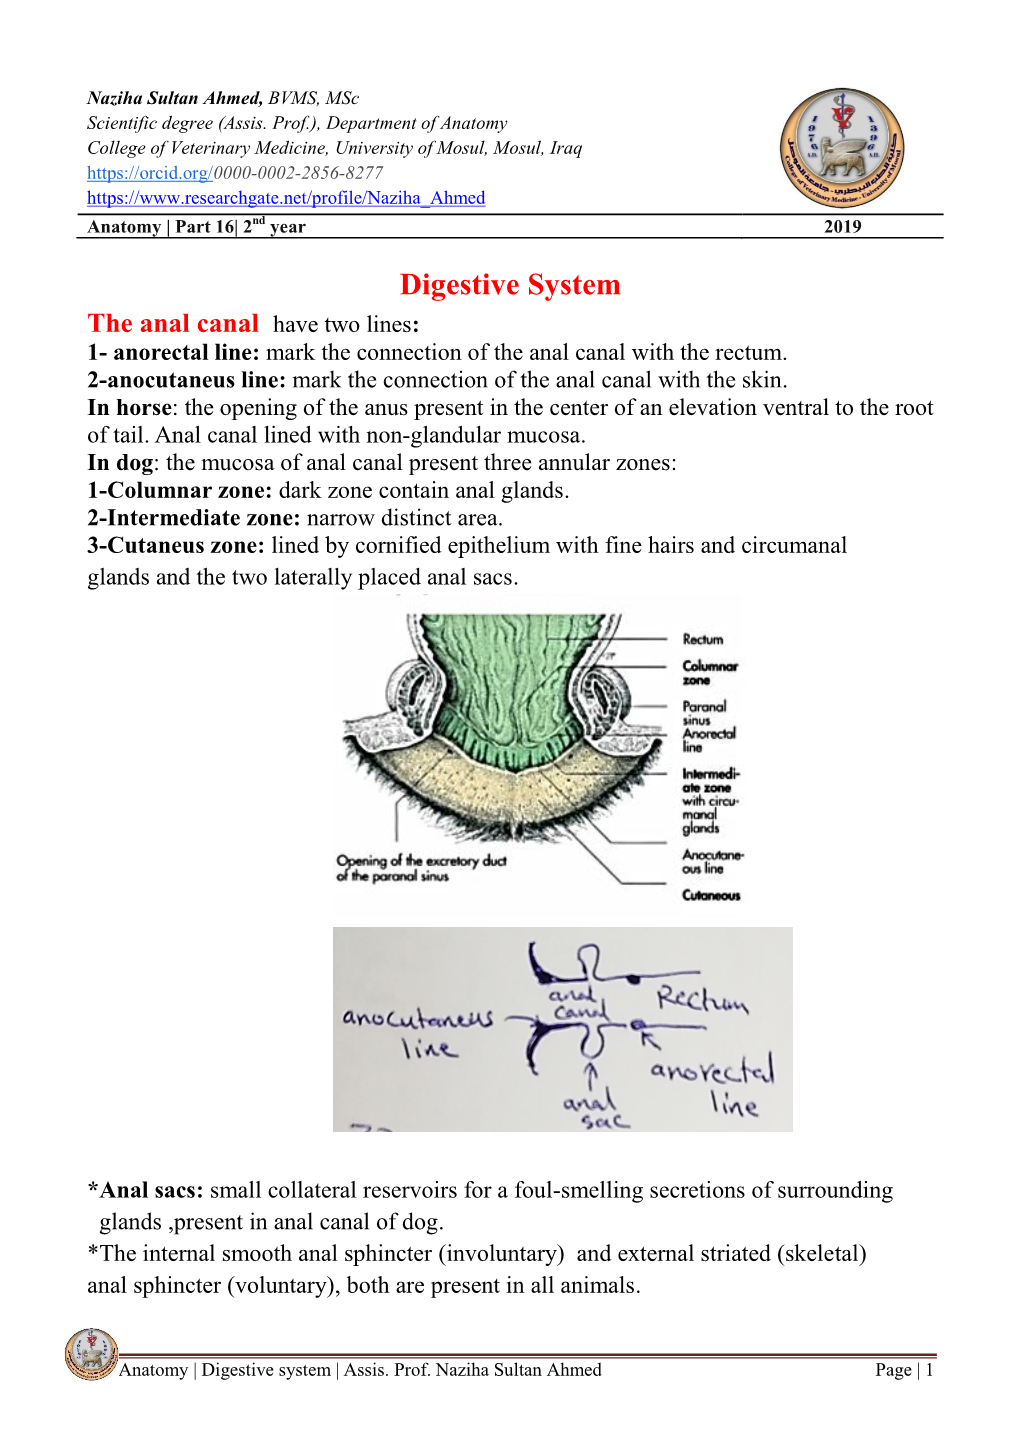 Digestive System the Anal Canal Have Two Lines: 1- Anorectal Line: Mark the Connection of the Anal Canal with the Rectum